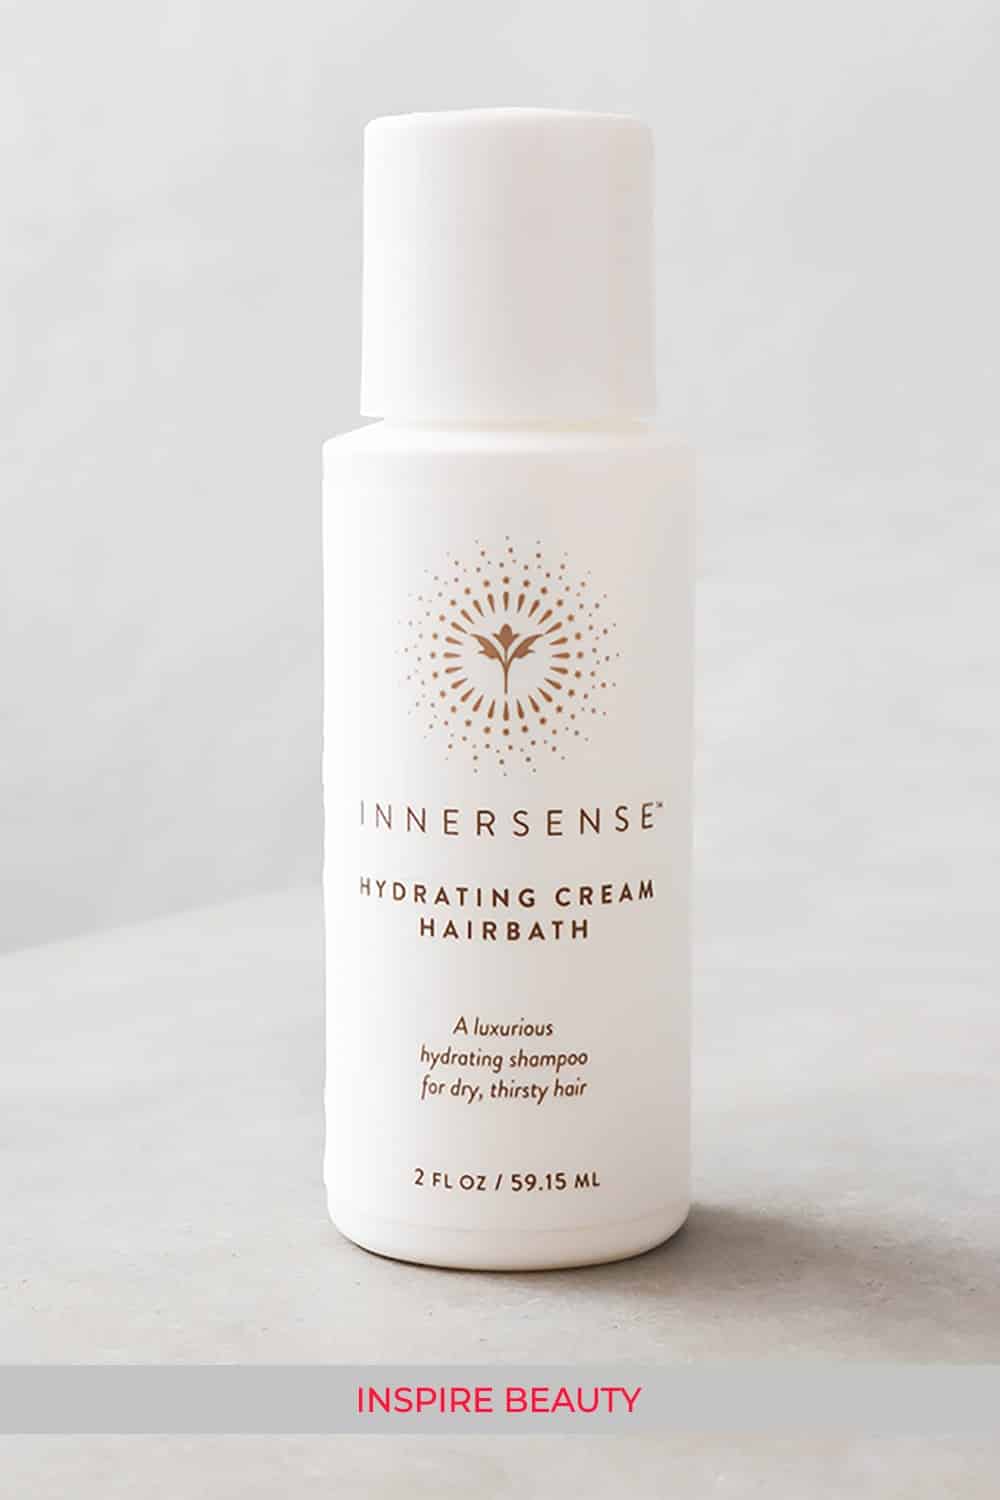 Innersense Hydrating Cream Hairbath review for dry, damaged and brittle hair.